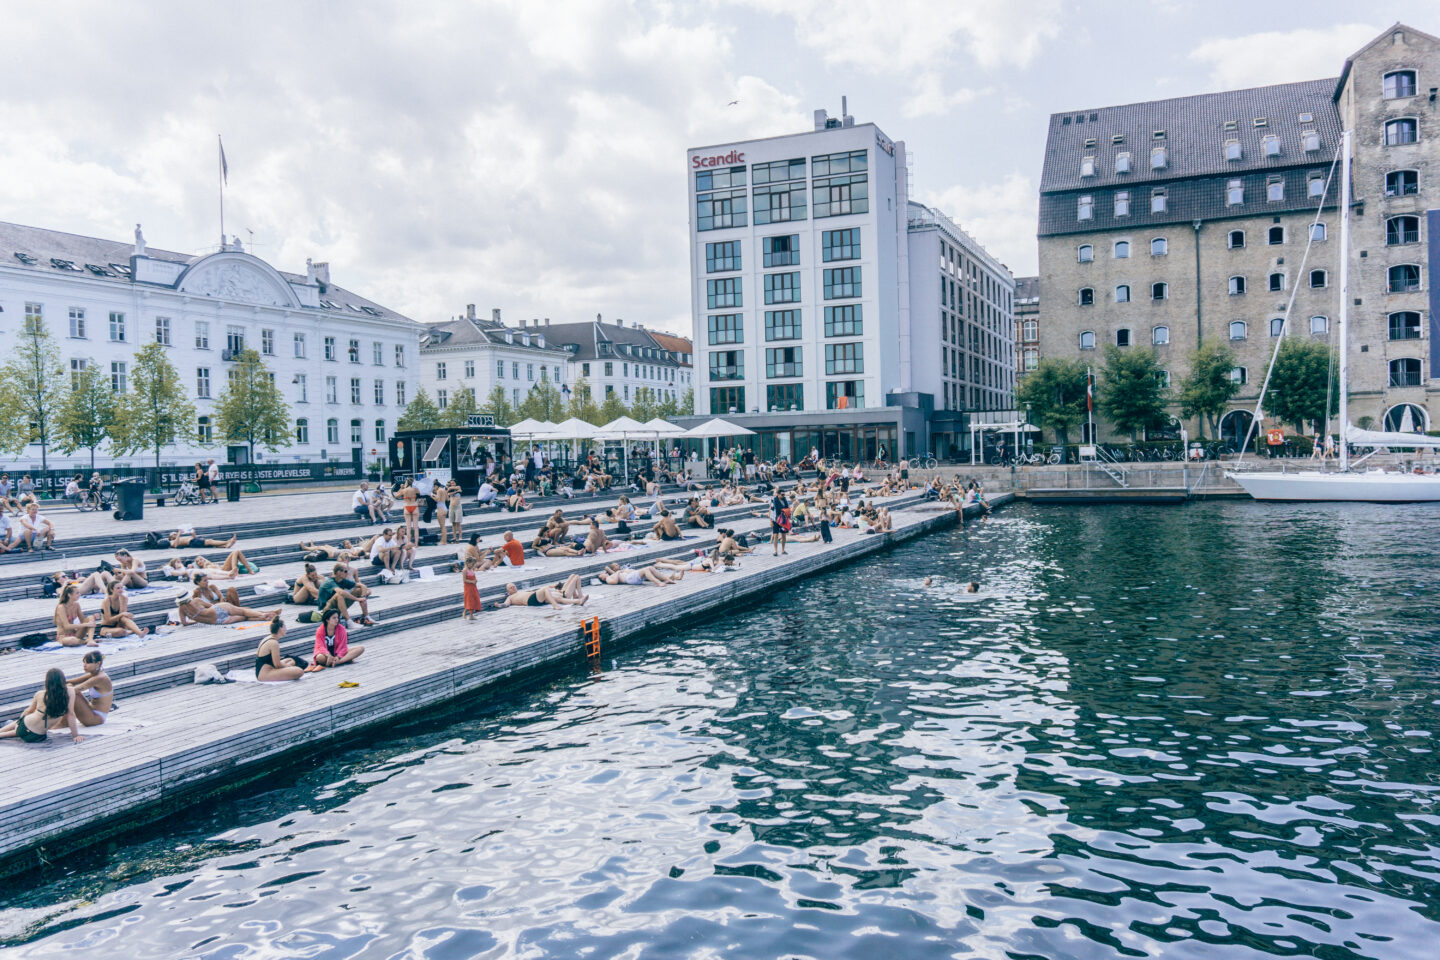 People swimming and sunbathing at the canals in the heart of Copenhagen 